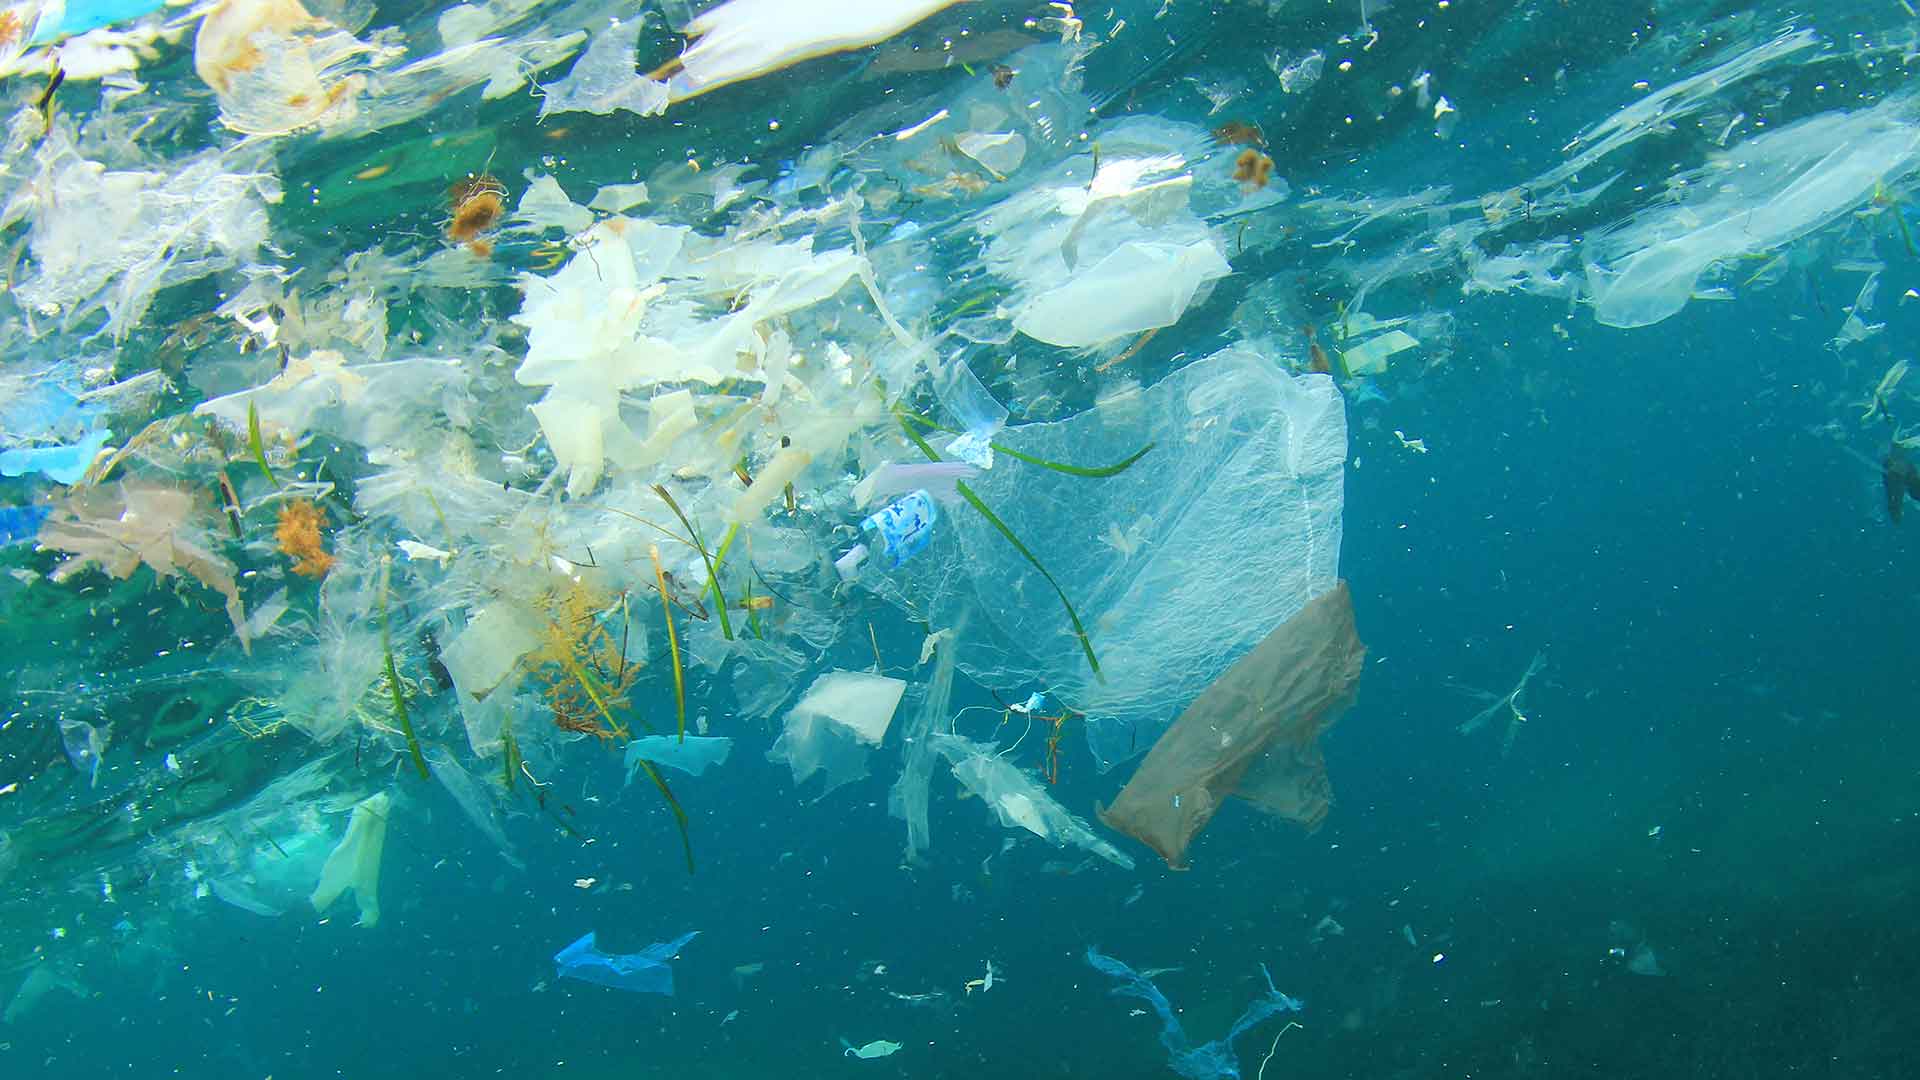 Reducing plastic pollution in our oceans